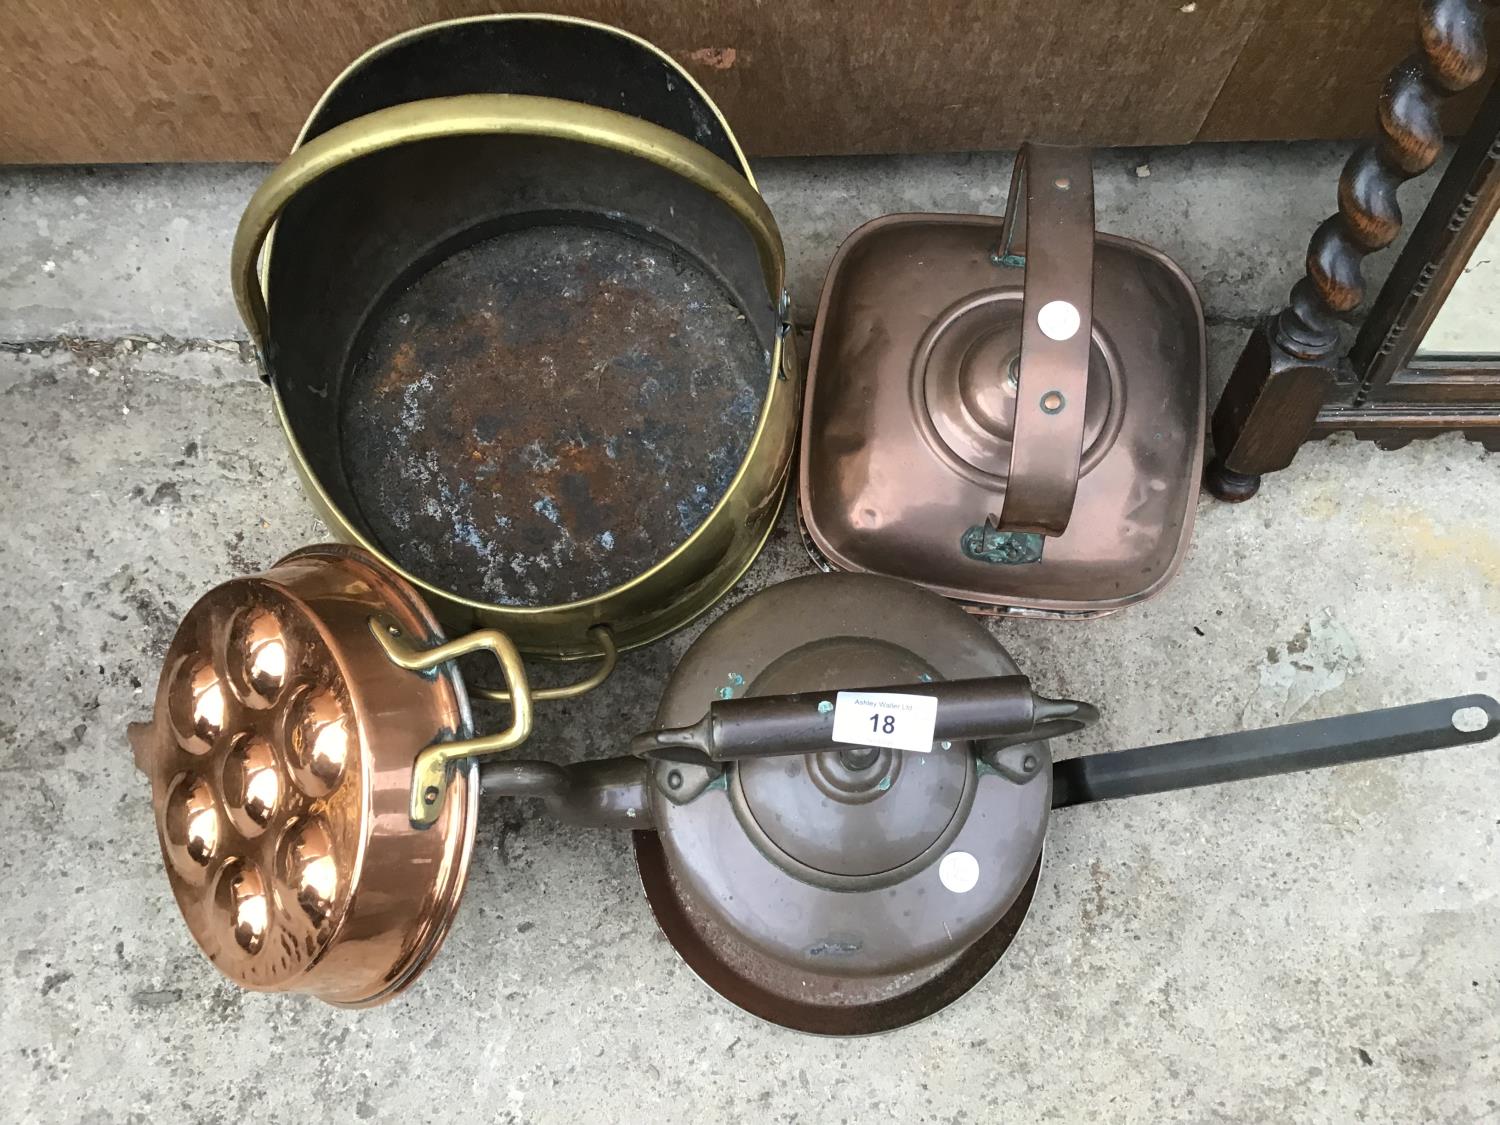 VARIOUS VINTAGE/ARTS AND CRAFTS ITEMS TO INCLUDE A BRASS COAL BUCKET, COPPER KETTLES ETC